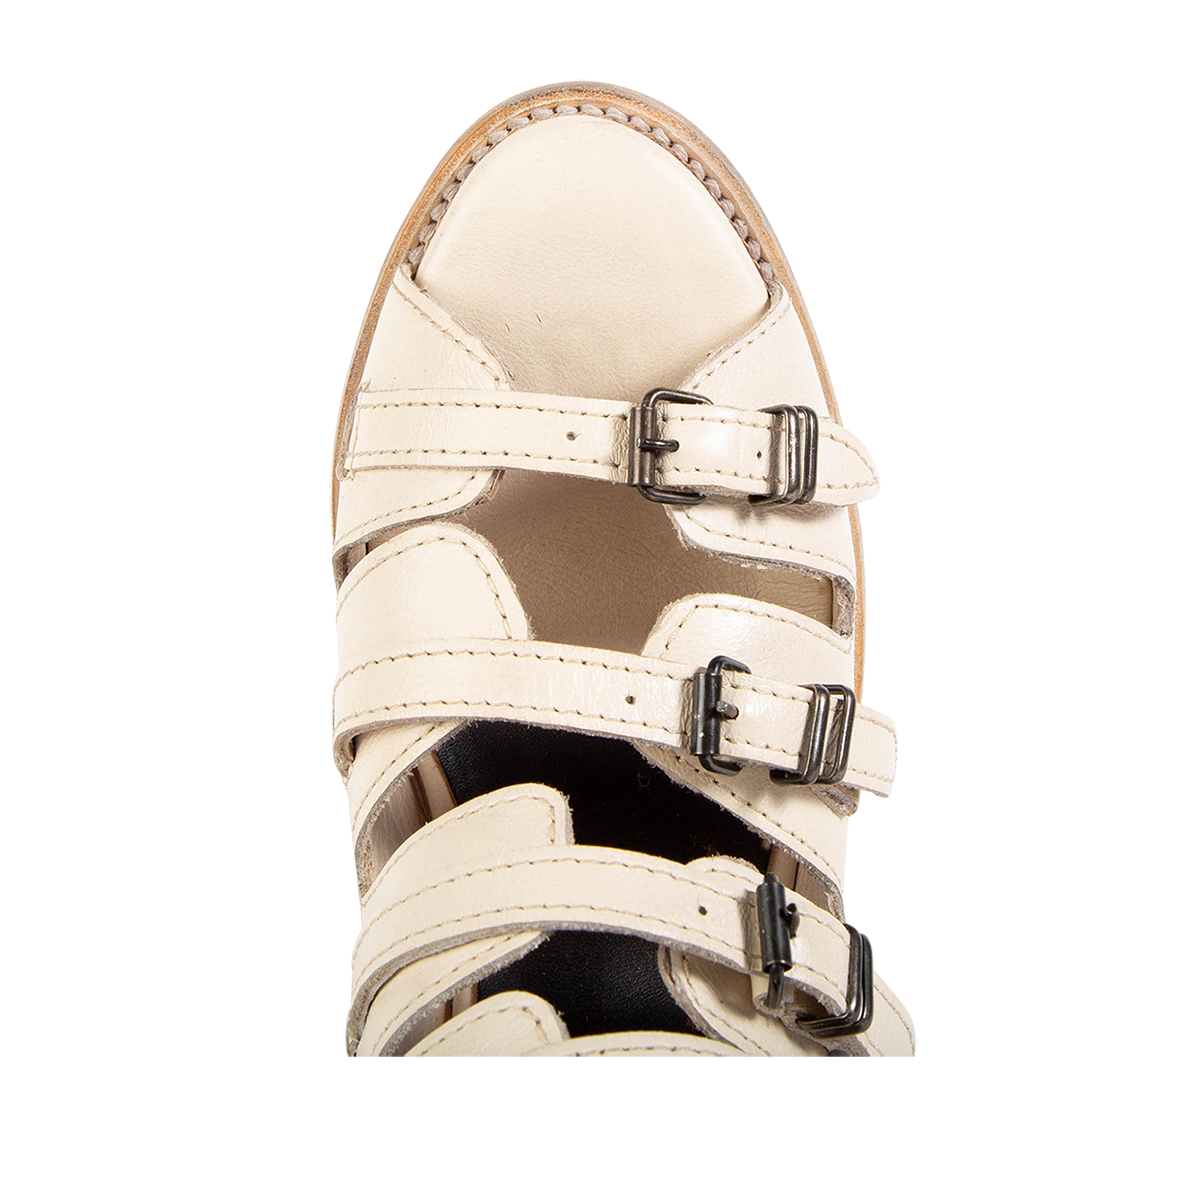 Top view showing almond toe and straps on FREEBIRD women's Quinn beige sandal